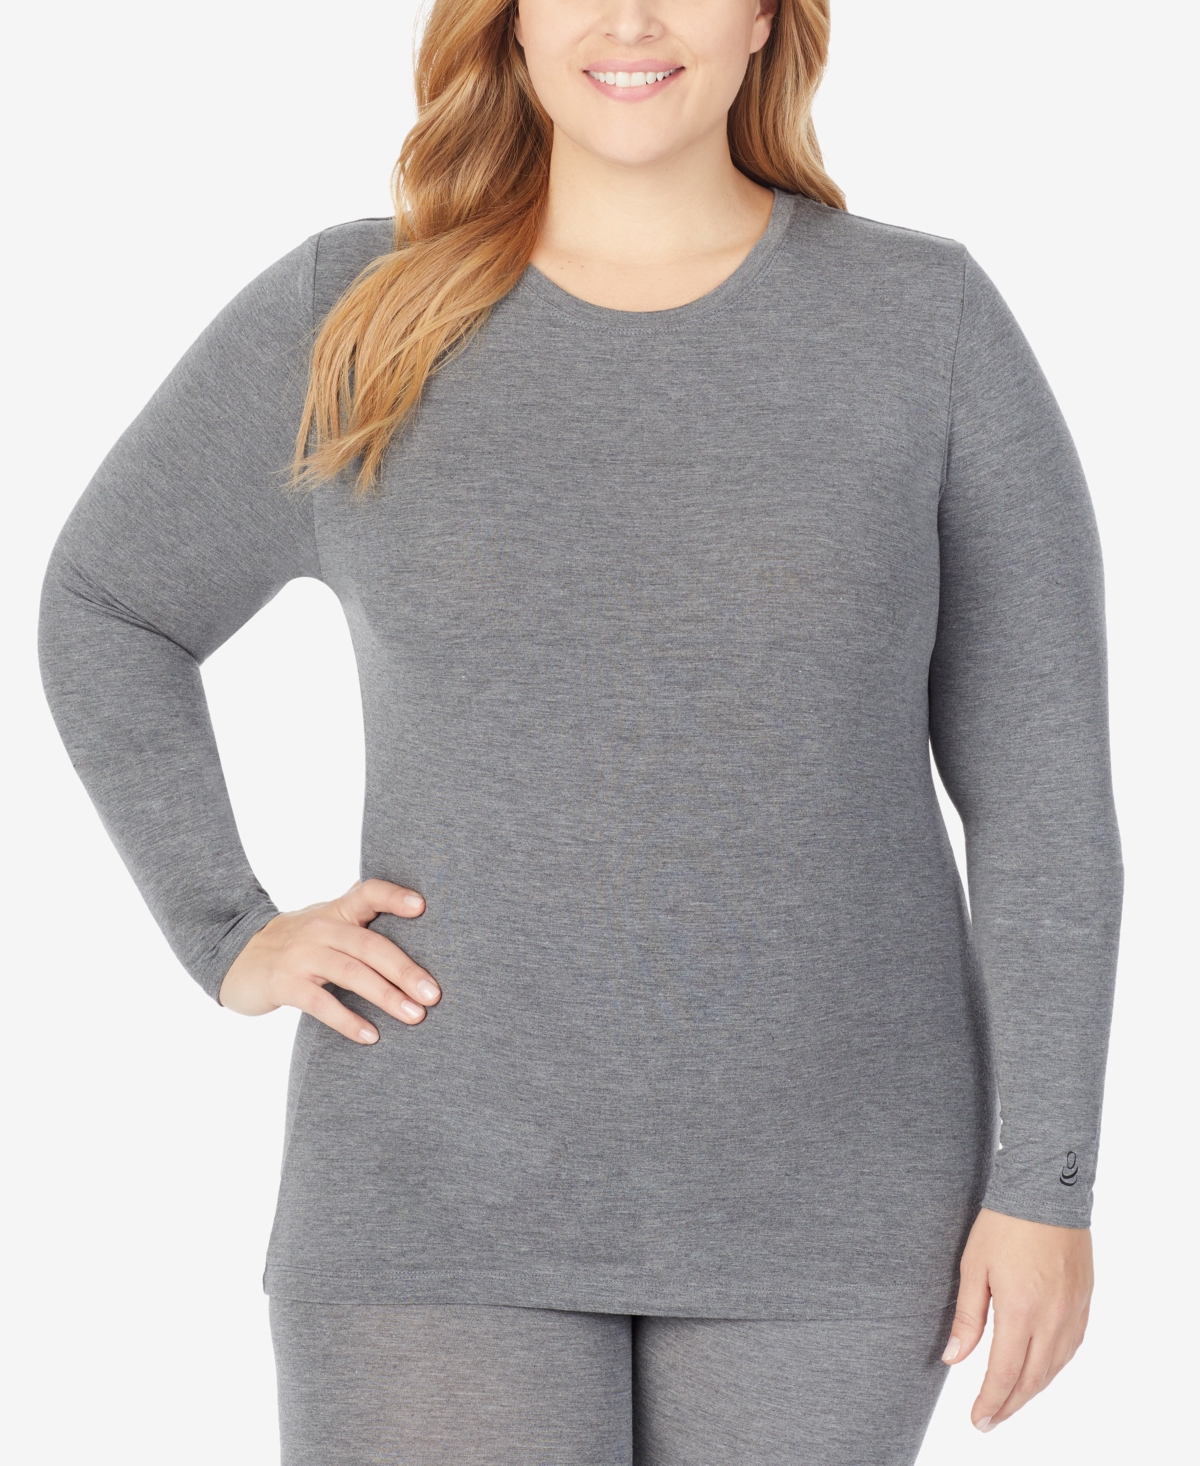 Plus Size Softwear with Stretch Long Sleeve Top - Black